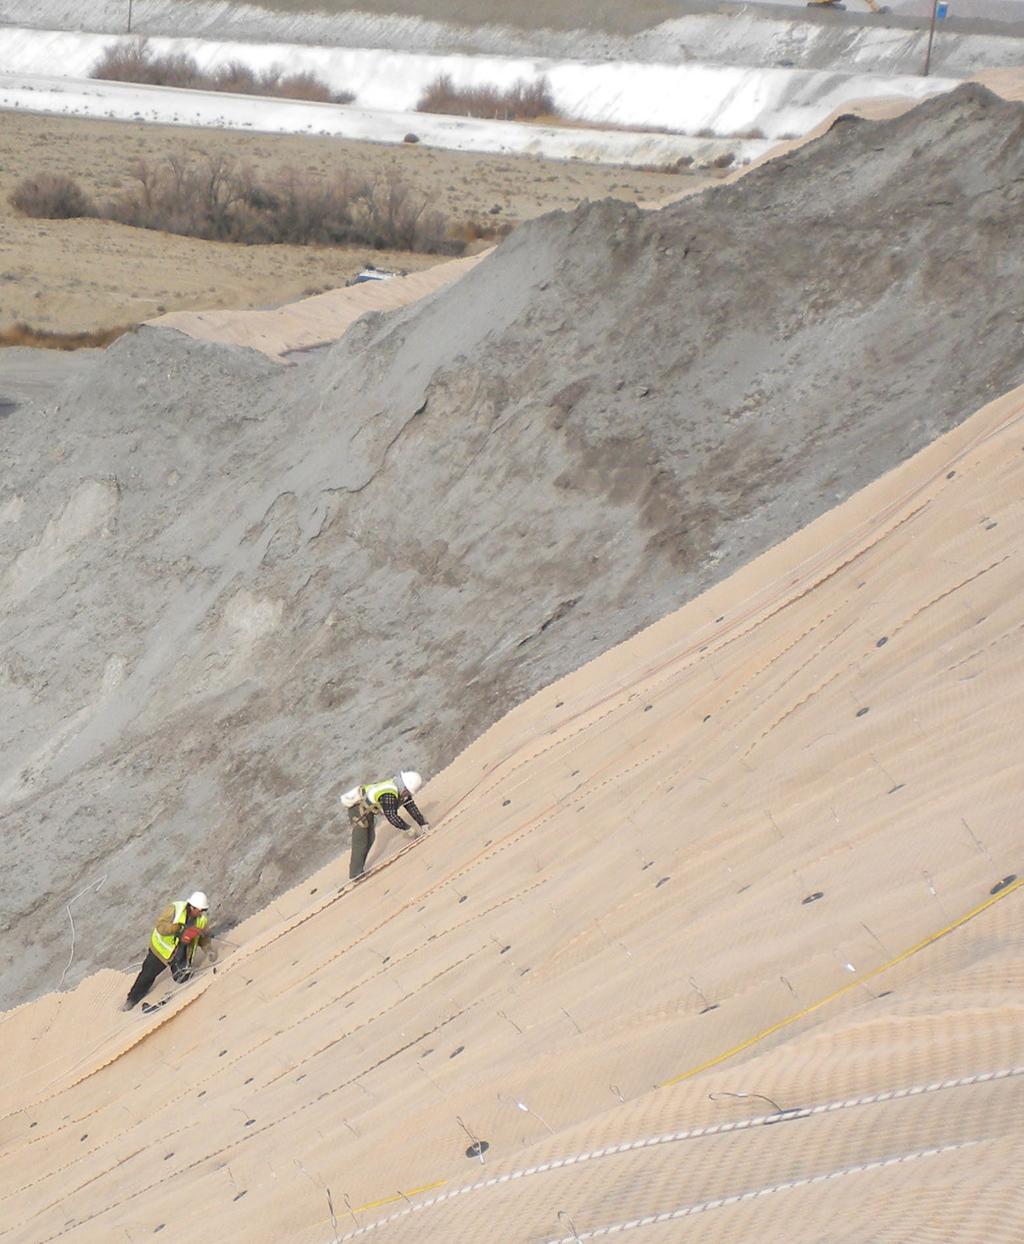 GEOSYNTHETICS NOT ALL ARE CREATED EQUAL Although geosynthetics hold outstanding potential for effective CCR management and storage, not all are of equal quality.